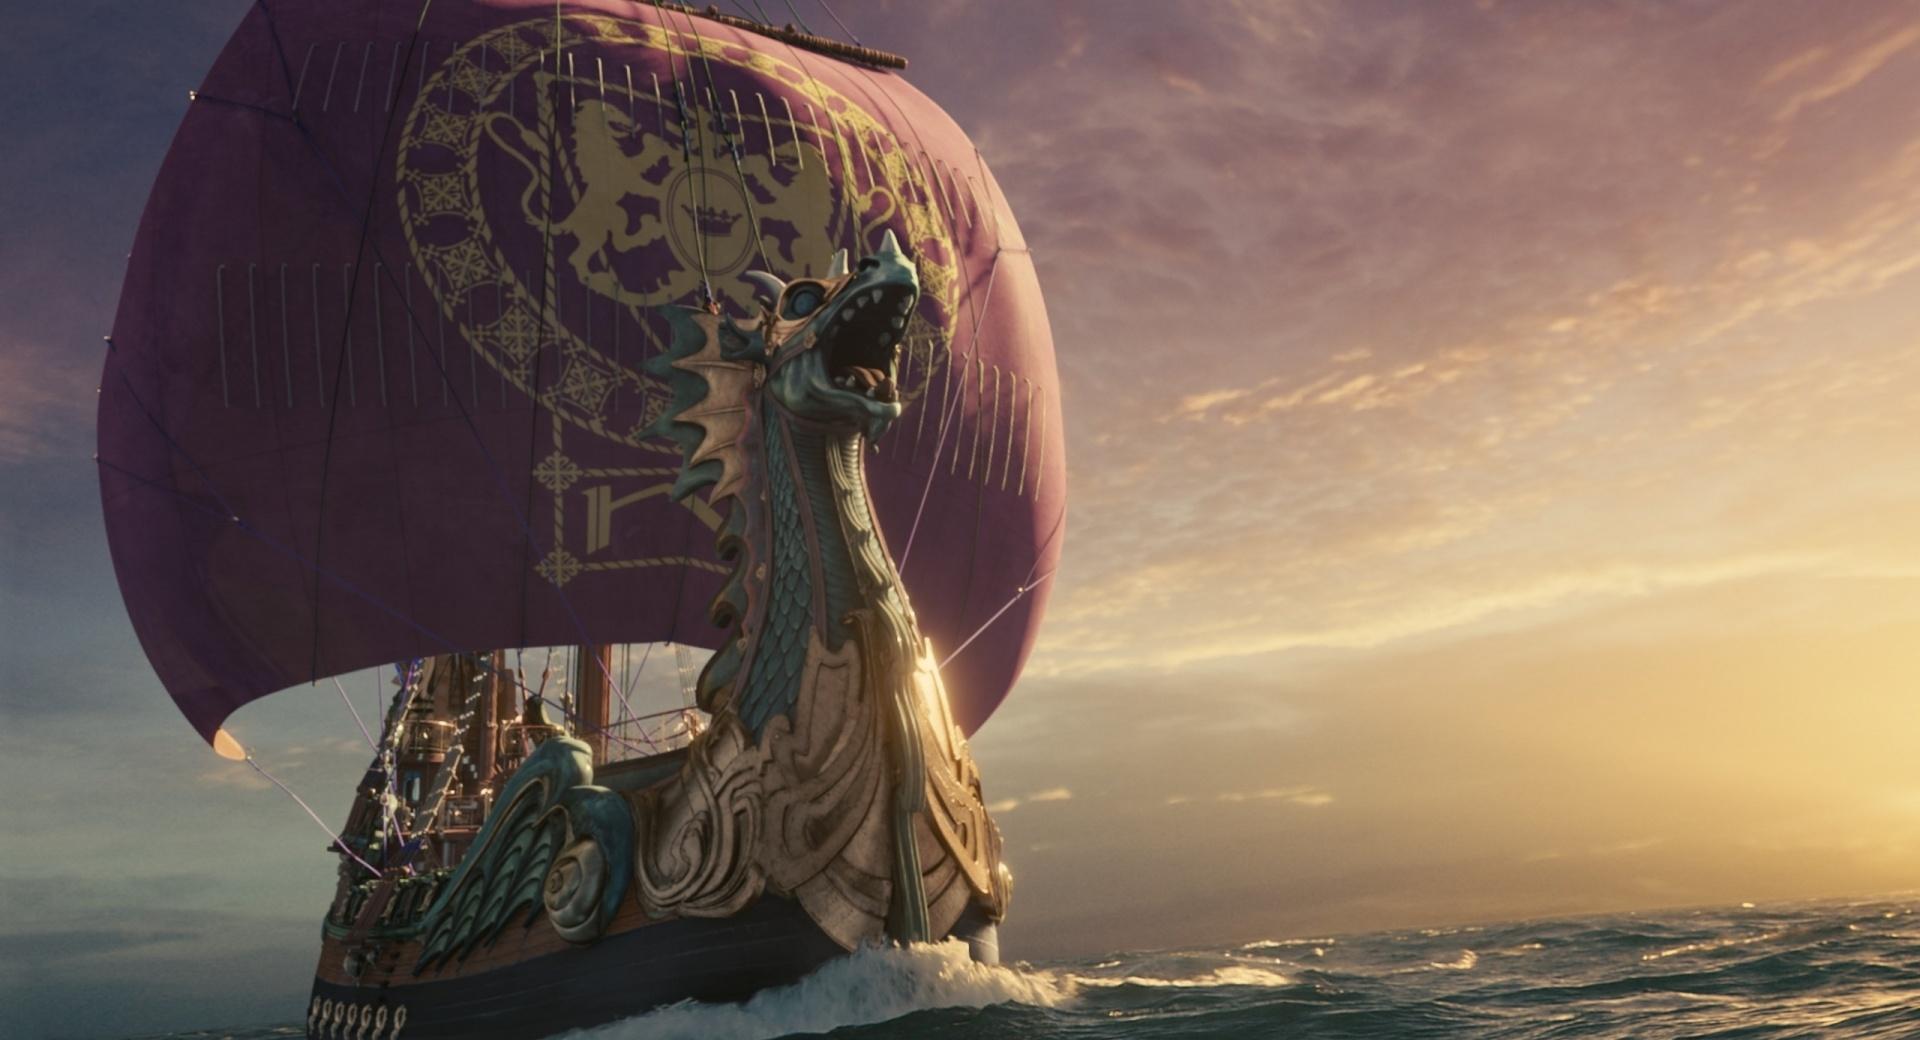 Voyage Of The Dawn Treader wallpapers HD quality